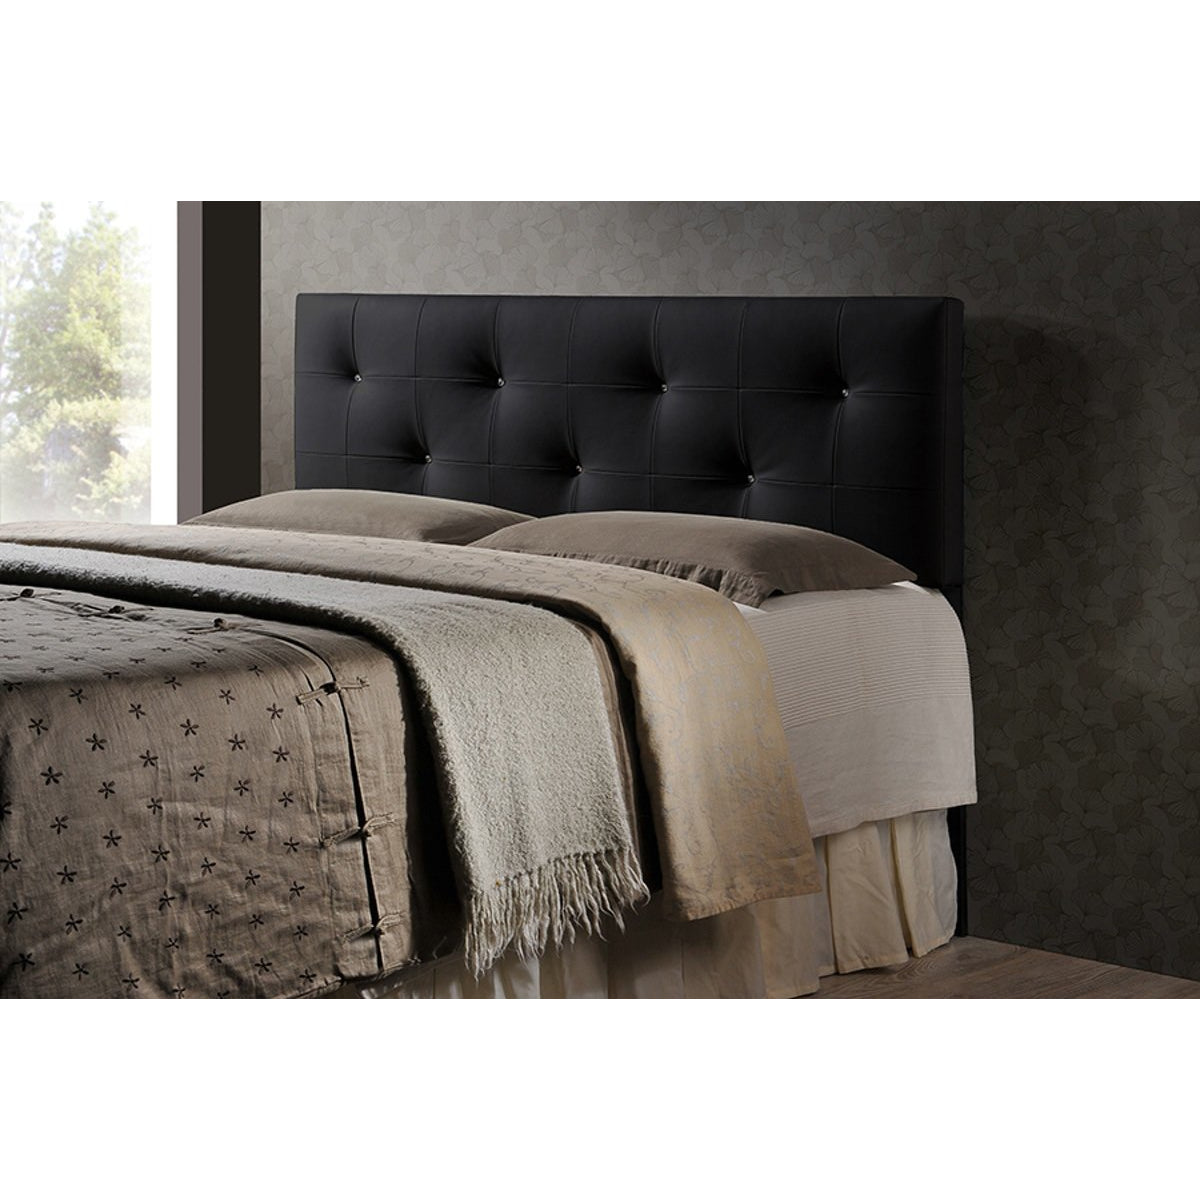 Baxton Studio Dalini Modern and Contemporary King Black Faux Leather Headboard with Faux Crystal Buttons Baxton Studio-Headboards-Minimal And Modern - 2